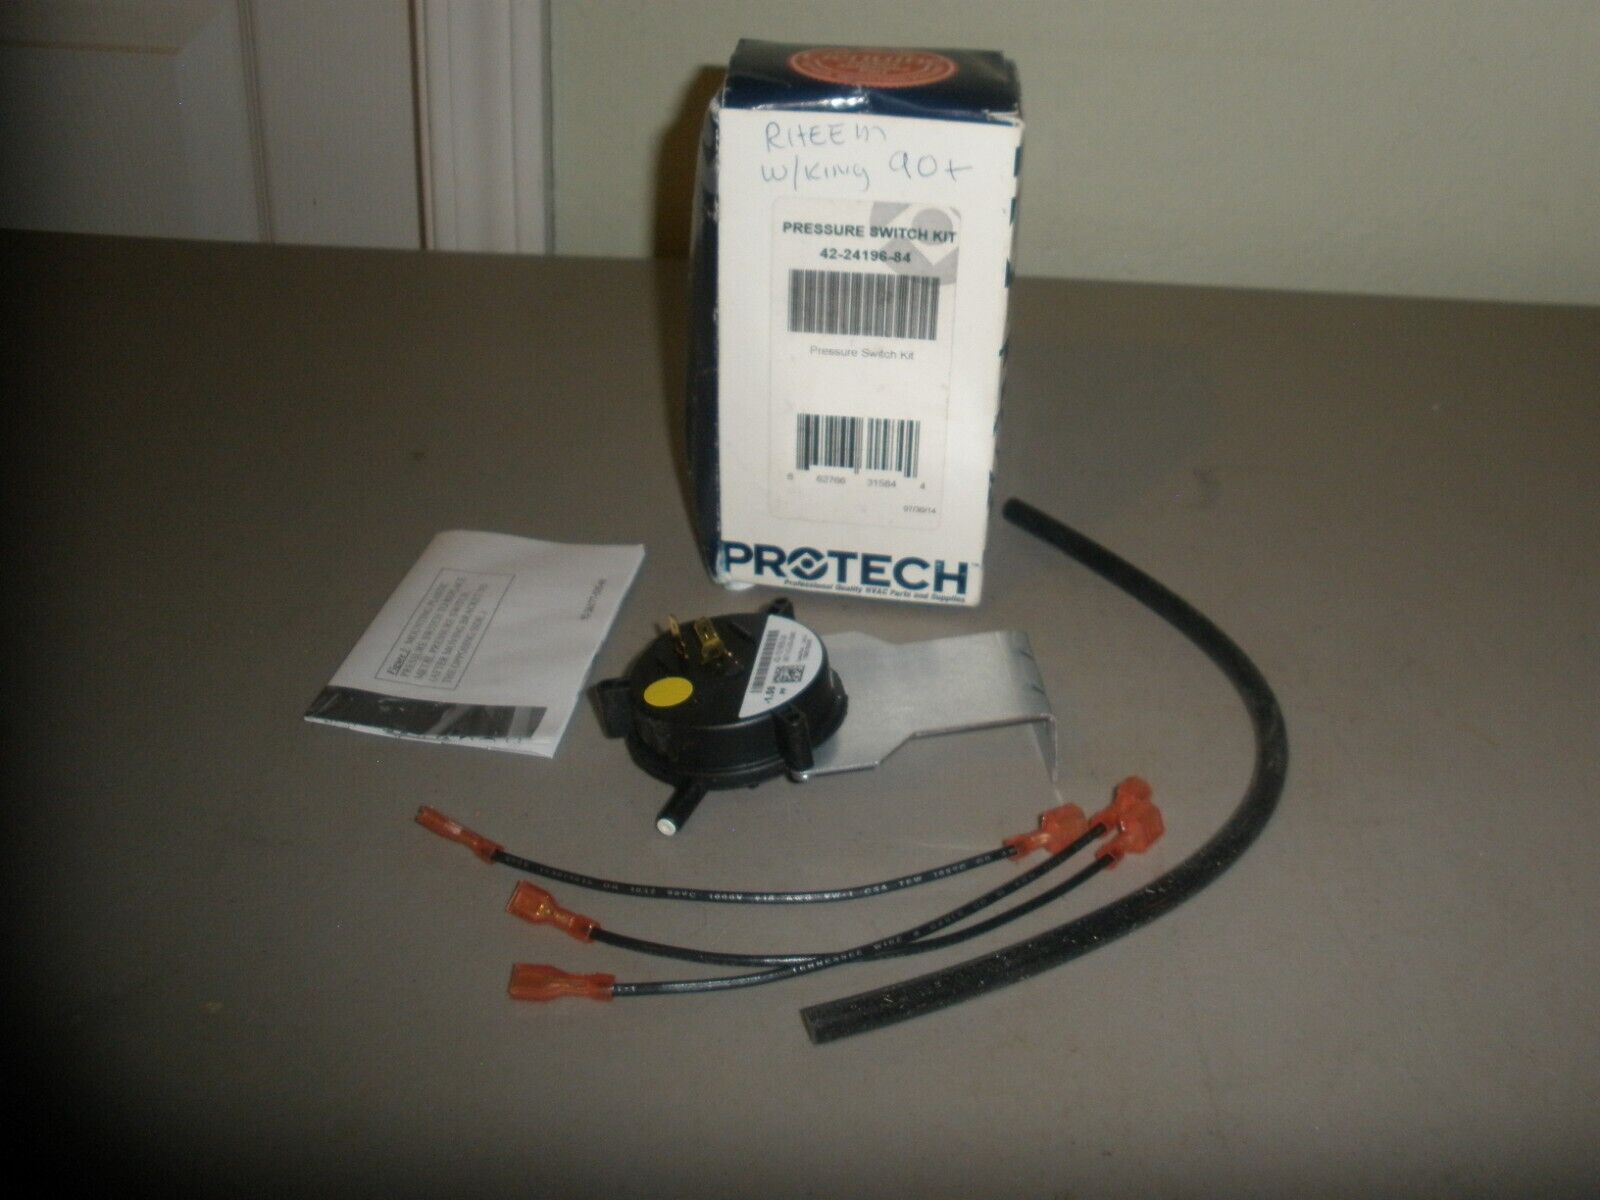 PROTECH 42-24196-84 PRESSURE SWITCH KIT